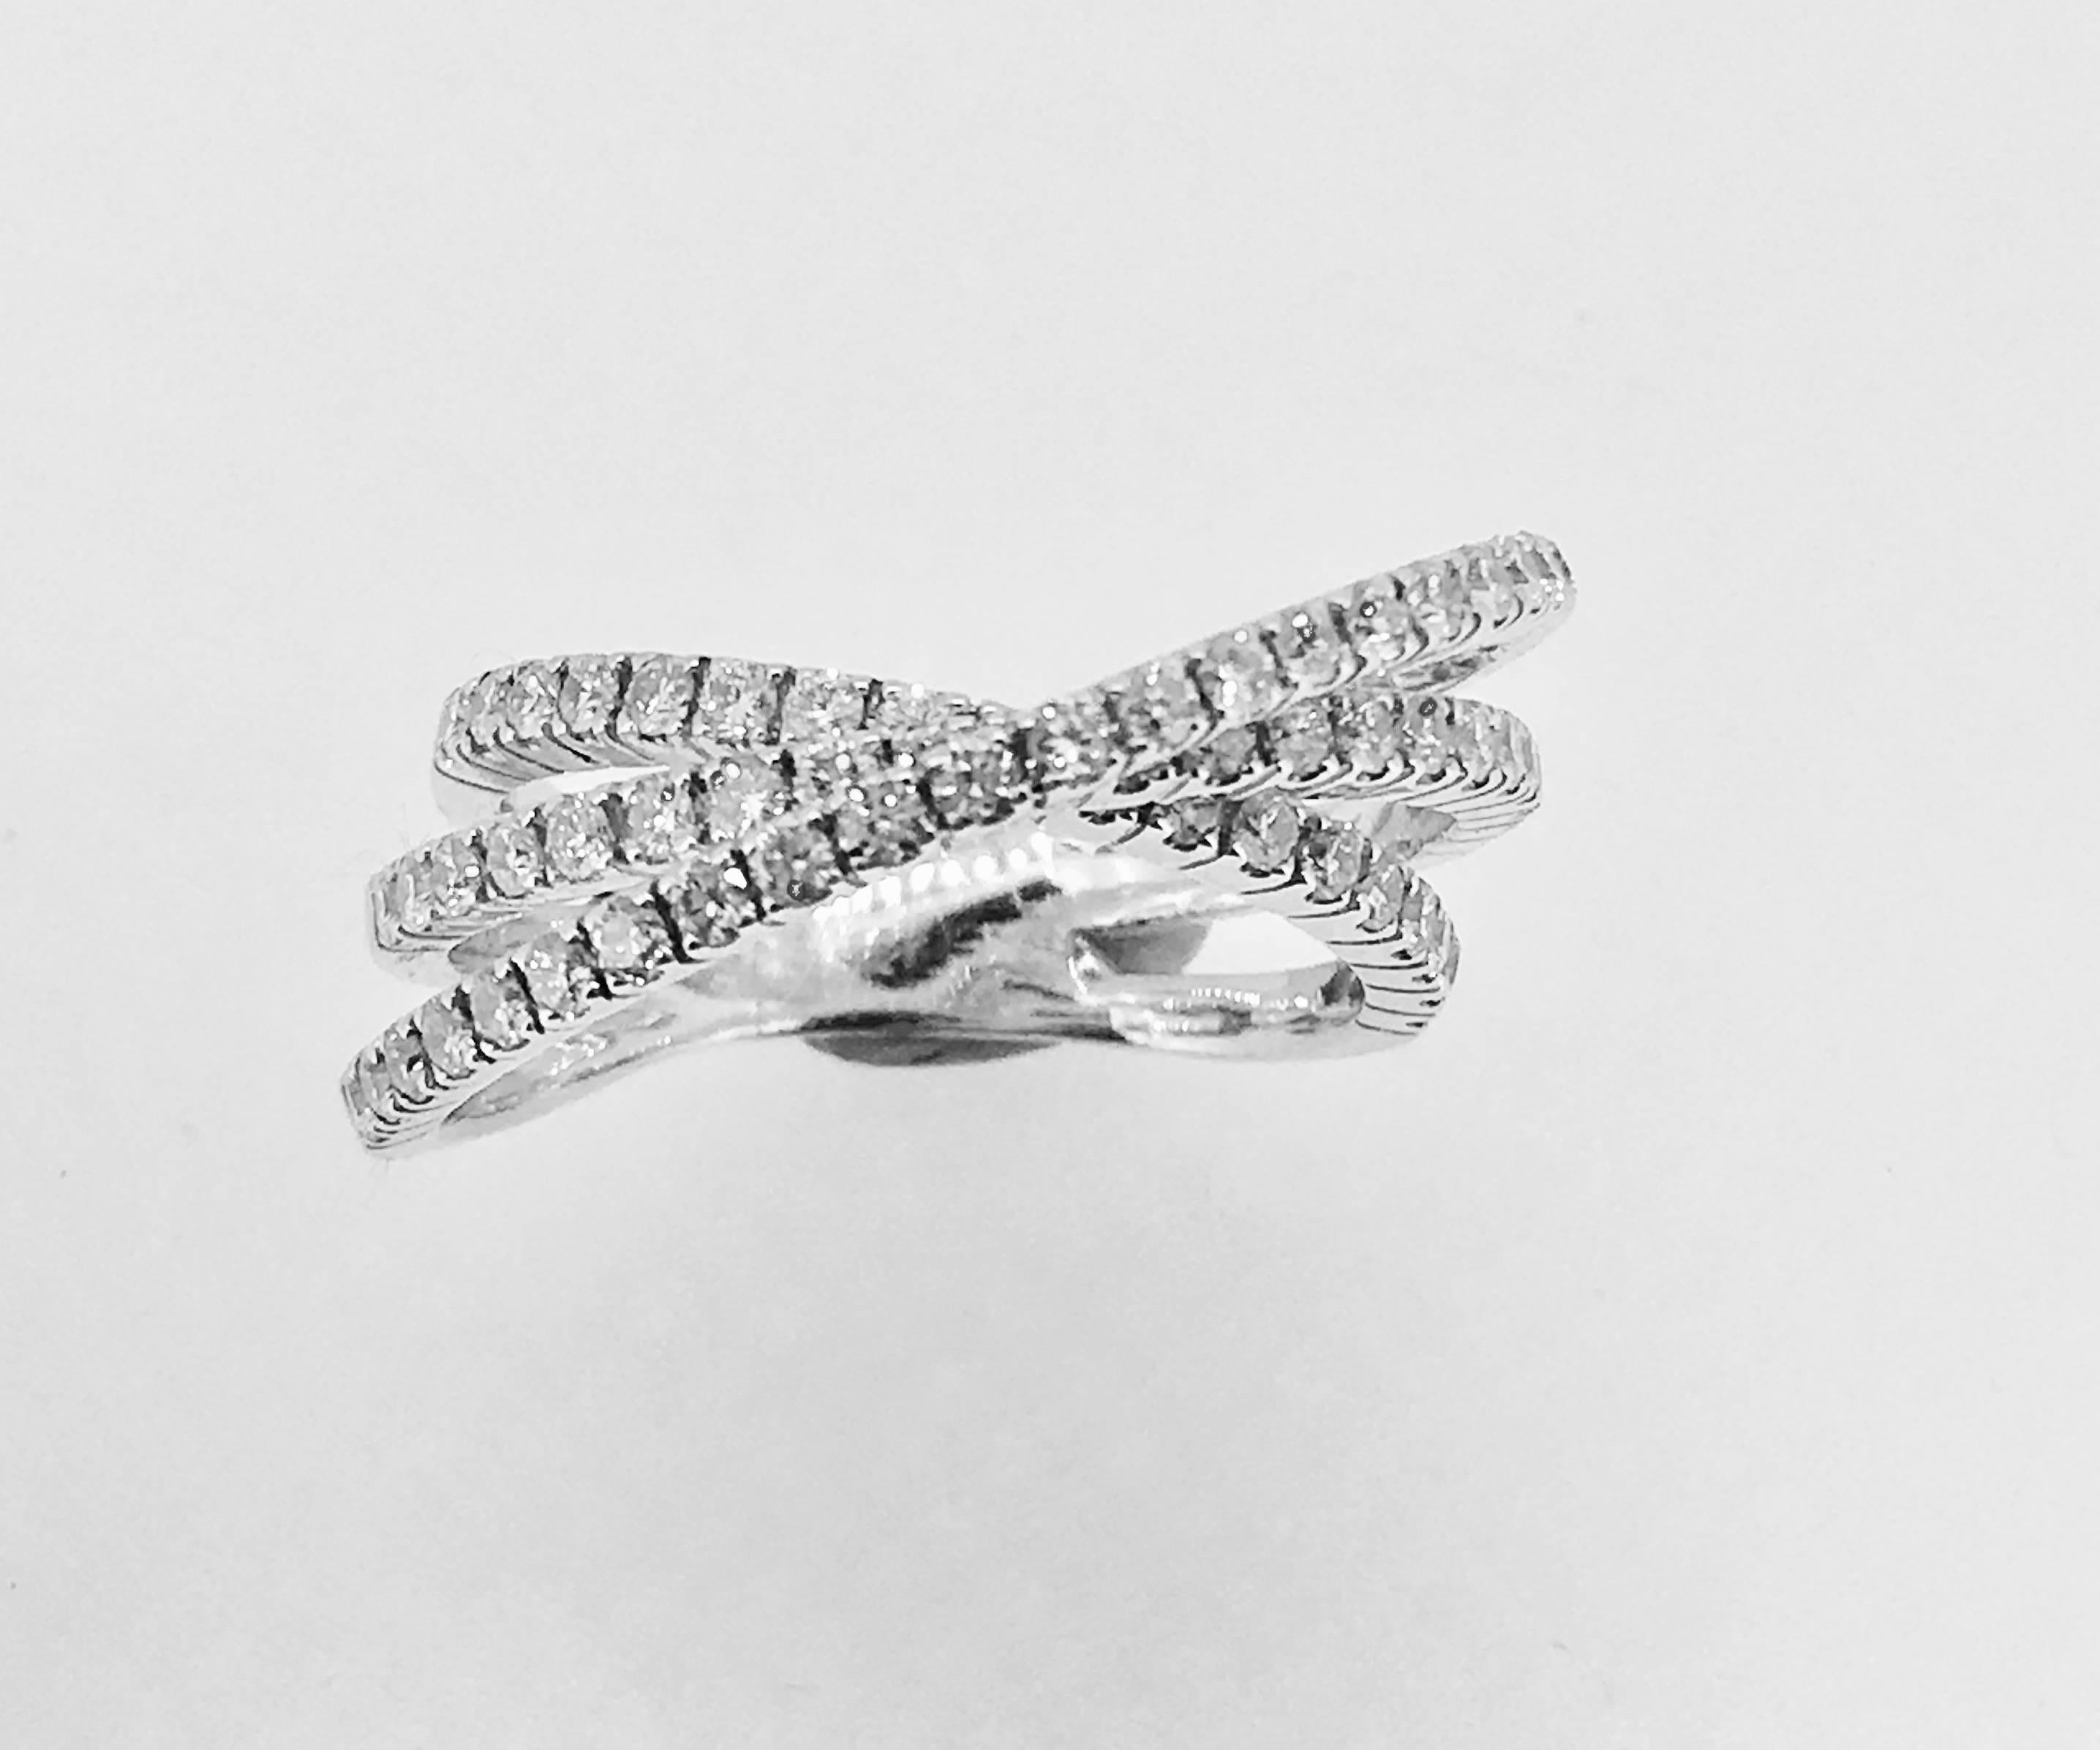 Beautifull white Gold diamond ring made by Steven in our Antwerp workshop .
The piece is a subtil combination 69 diamonds for a total of 1.38 ct .
It fits a 54.5 finger but we can size your finger too .